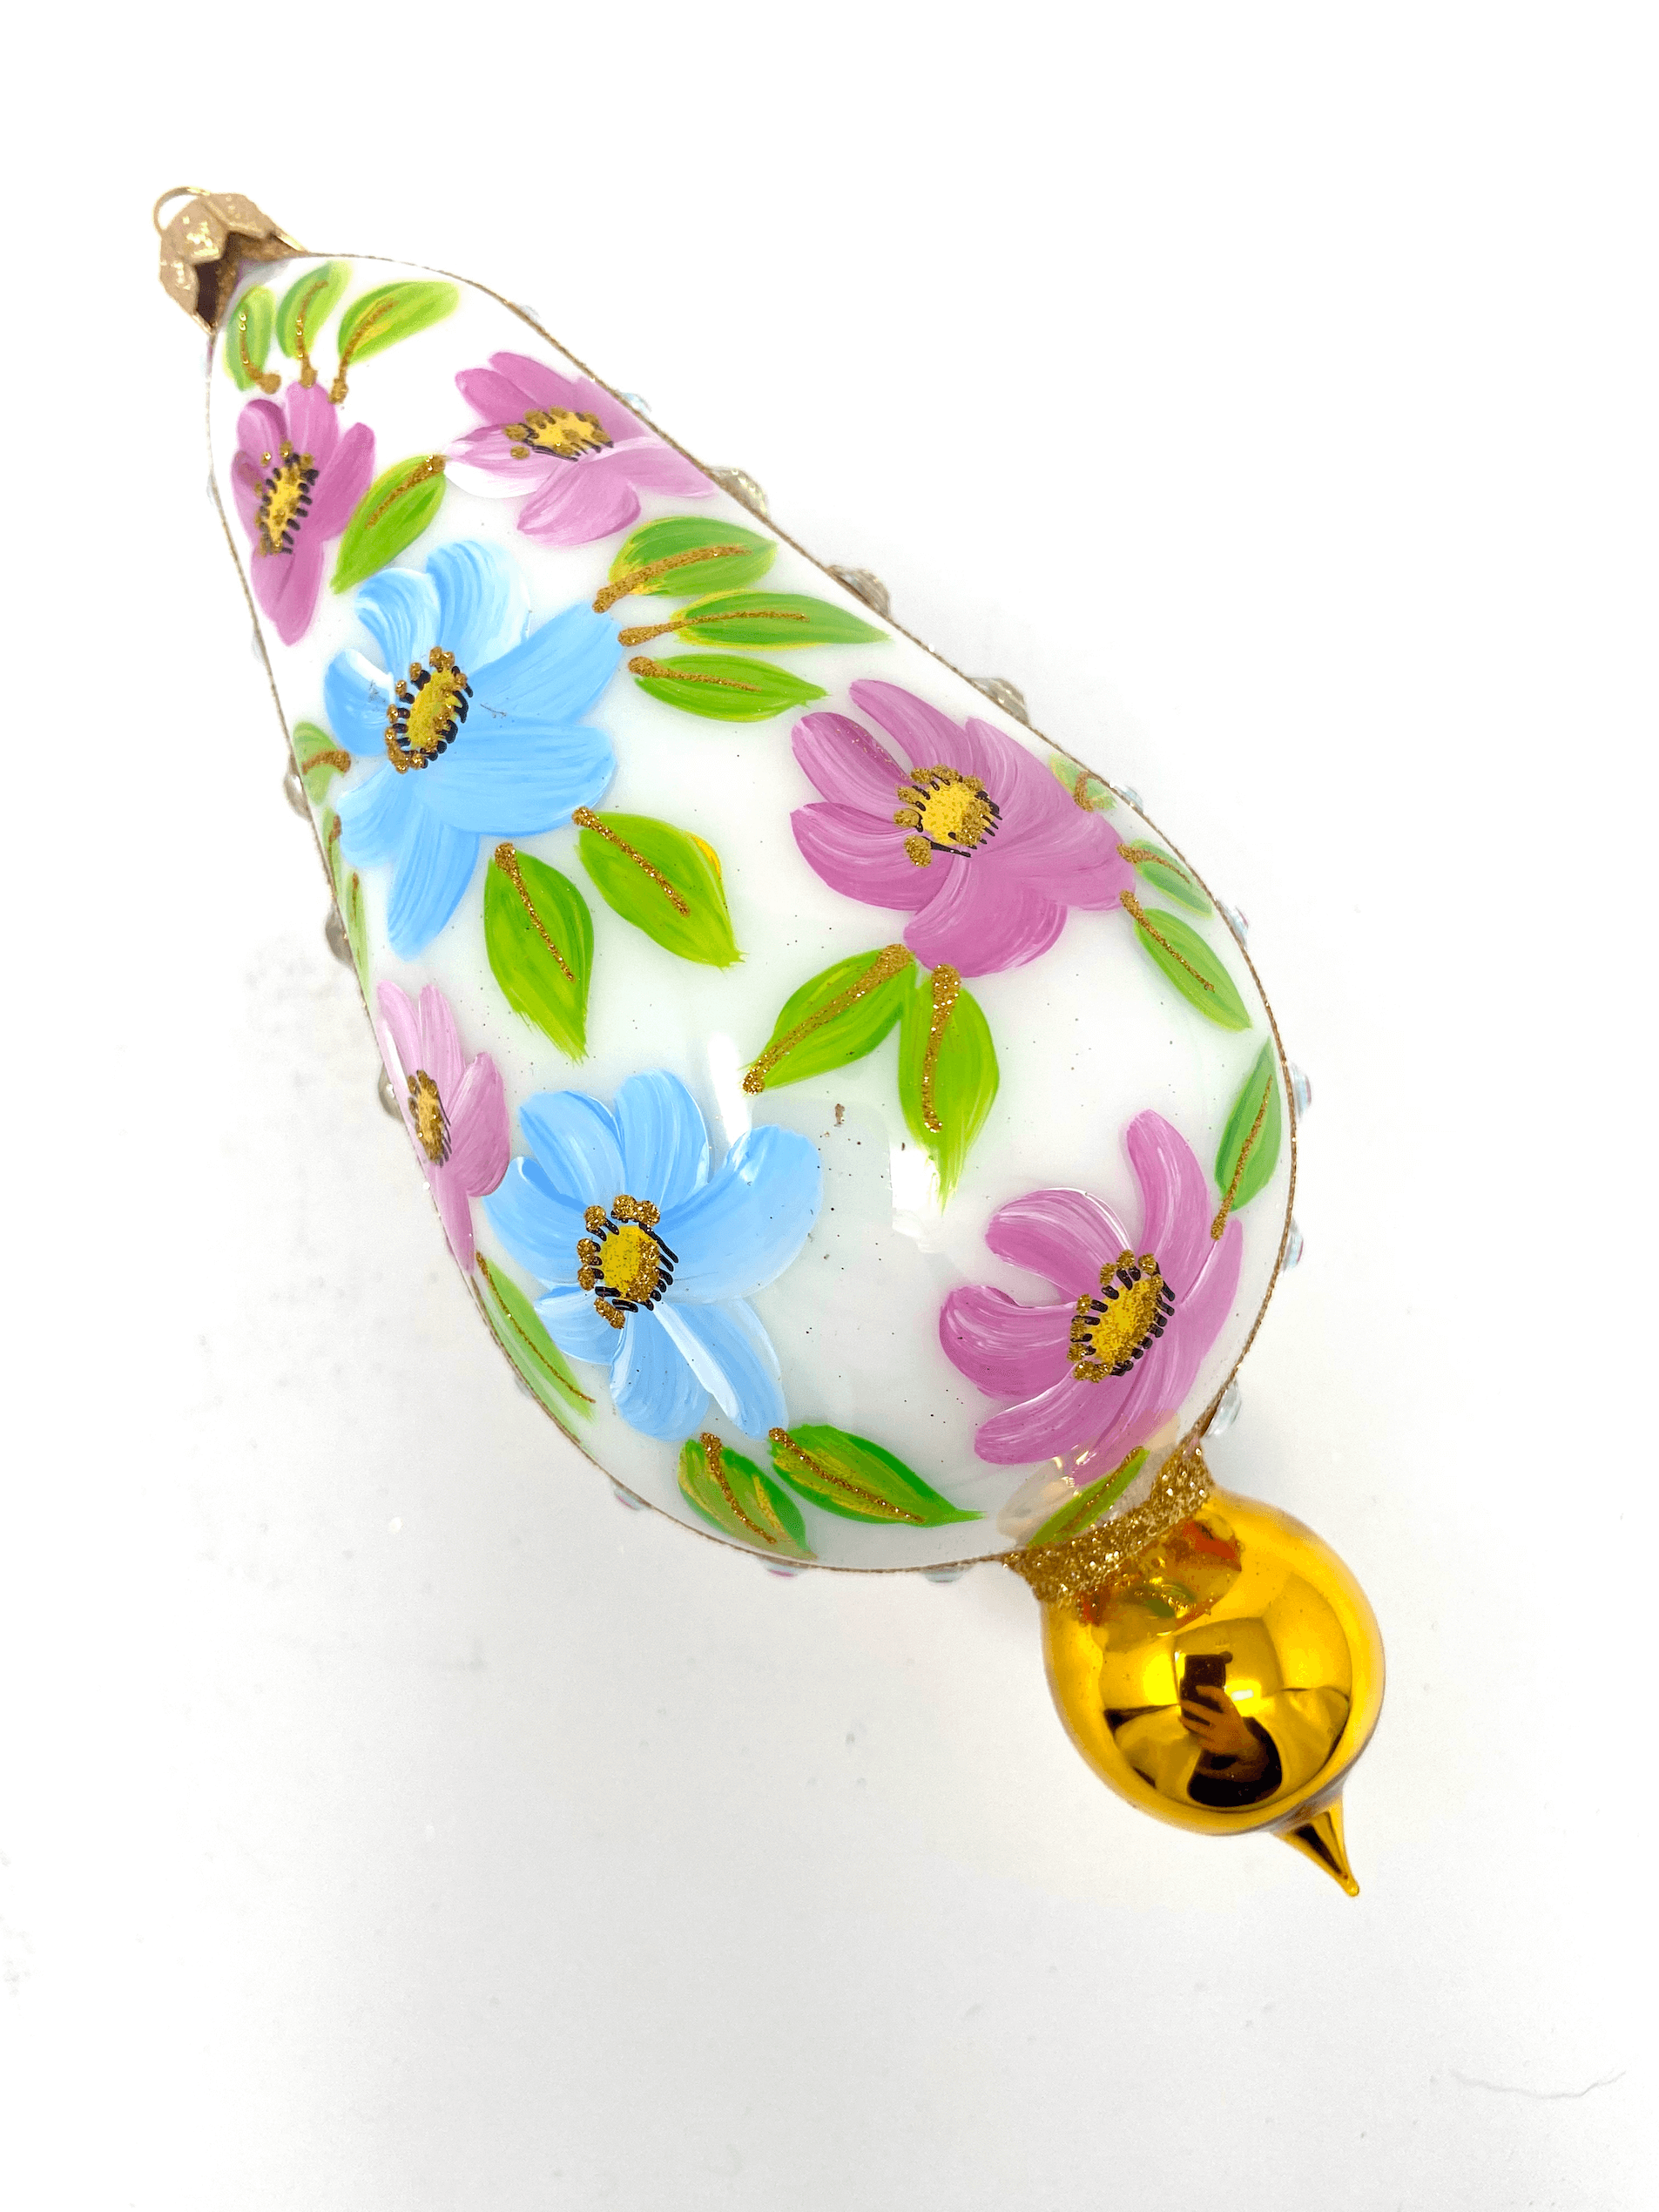 White eggplant shaped ornament featuring gemstones, intricate gold detailing, and hand painted floral blooms. A Christmas polish glass ornament. Floral Escape Floral Fetish.